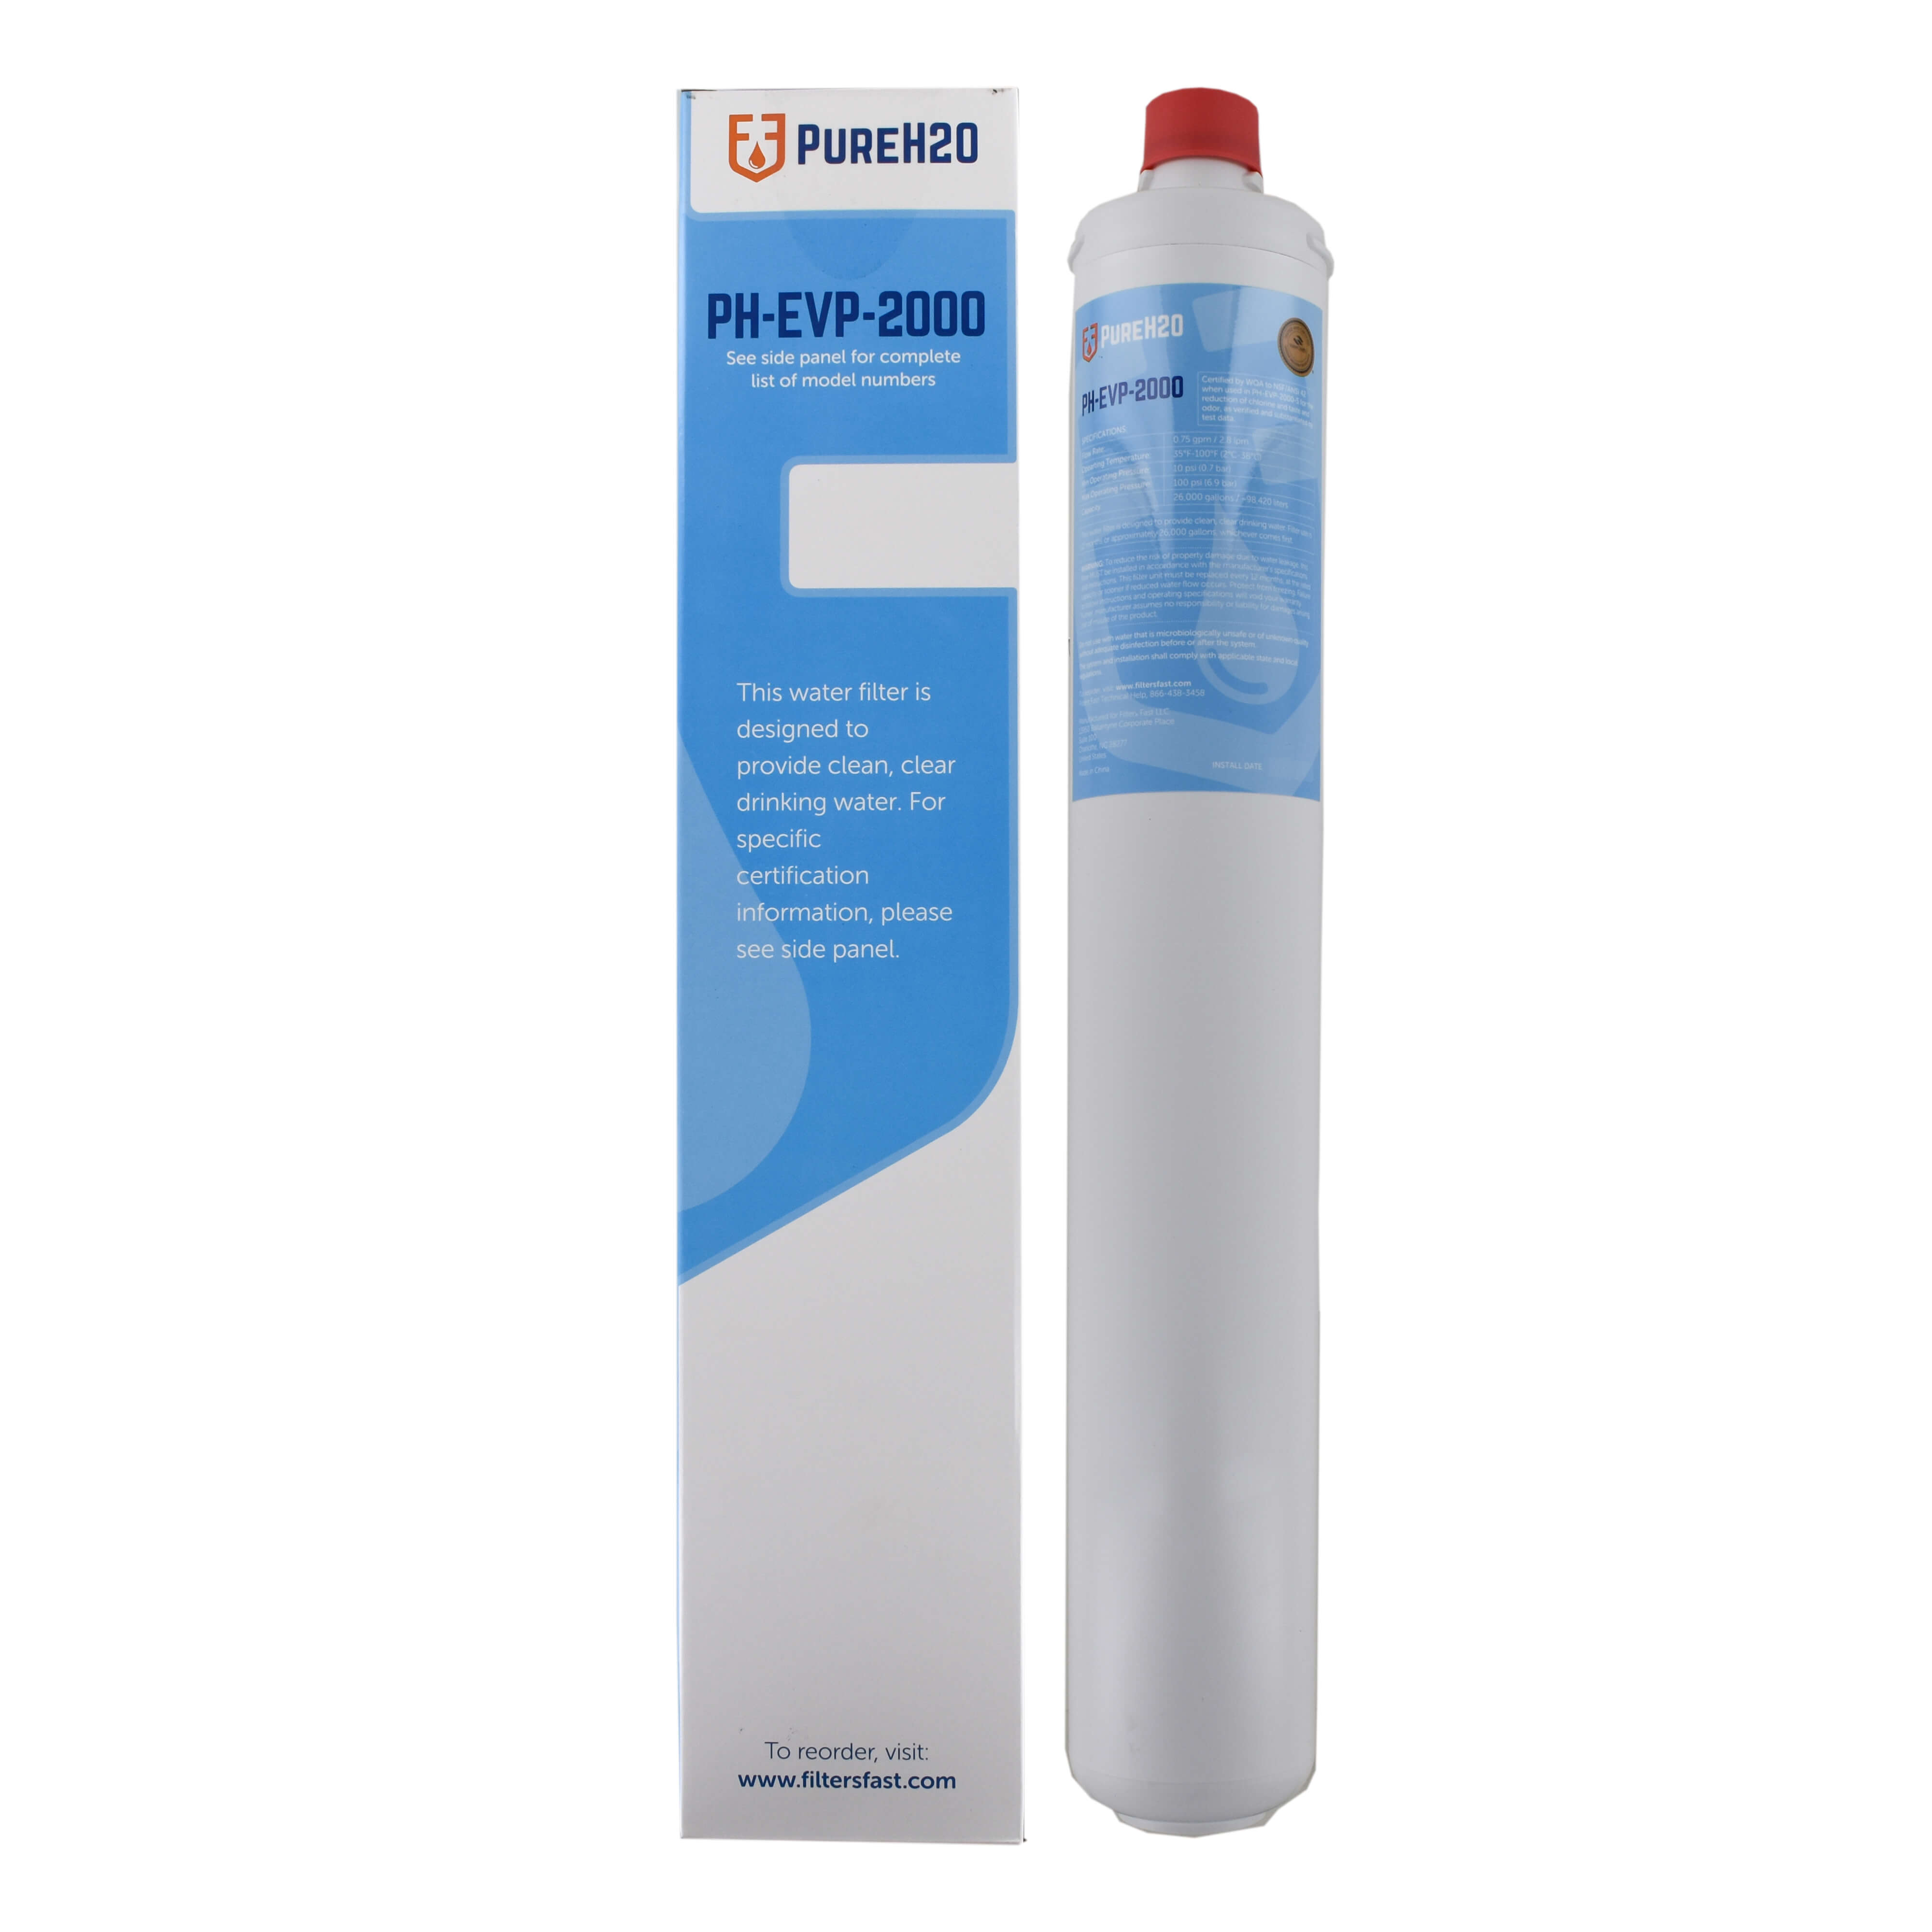 EV9612-22, i2000(2) PureH2O Replacement for Everpure EV9612-22, i2000(2) Insurice Water Filter